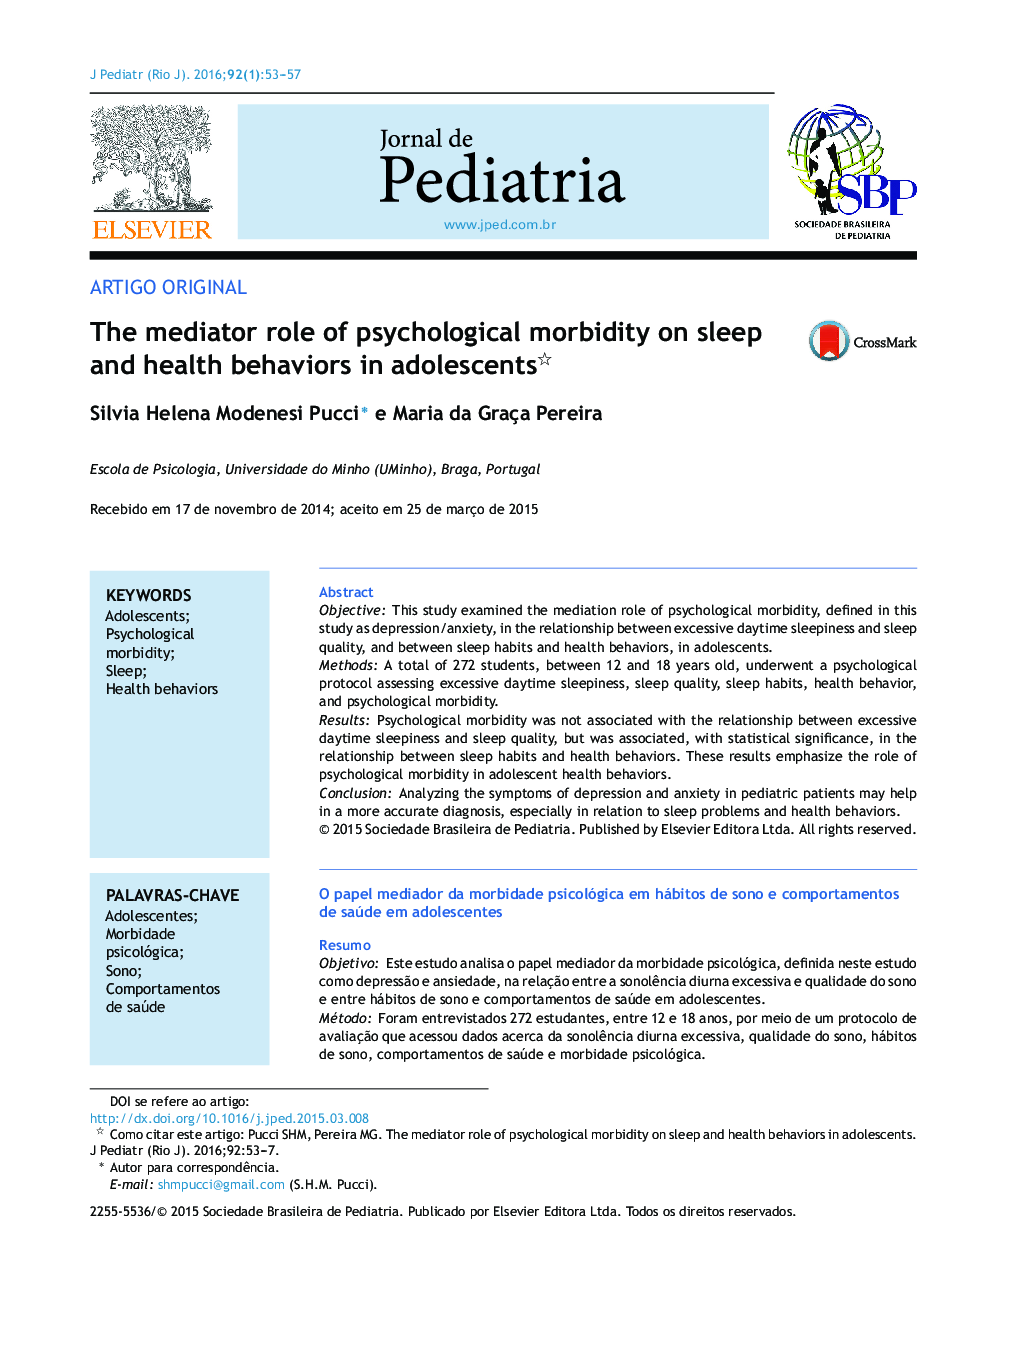 The mediator role of psychological morbidity on sleep and health behaviors in adolescents 